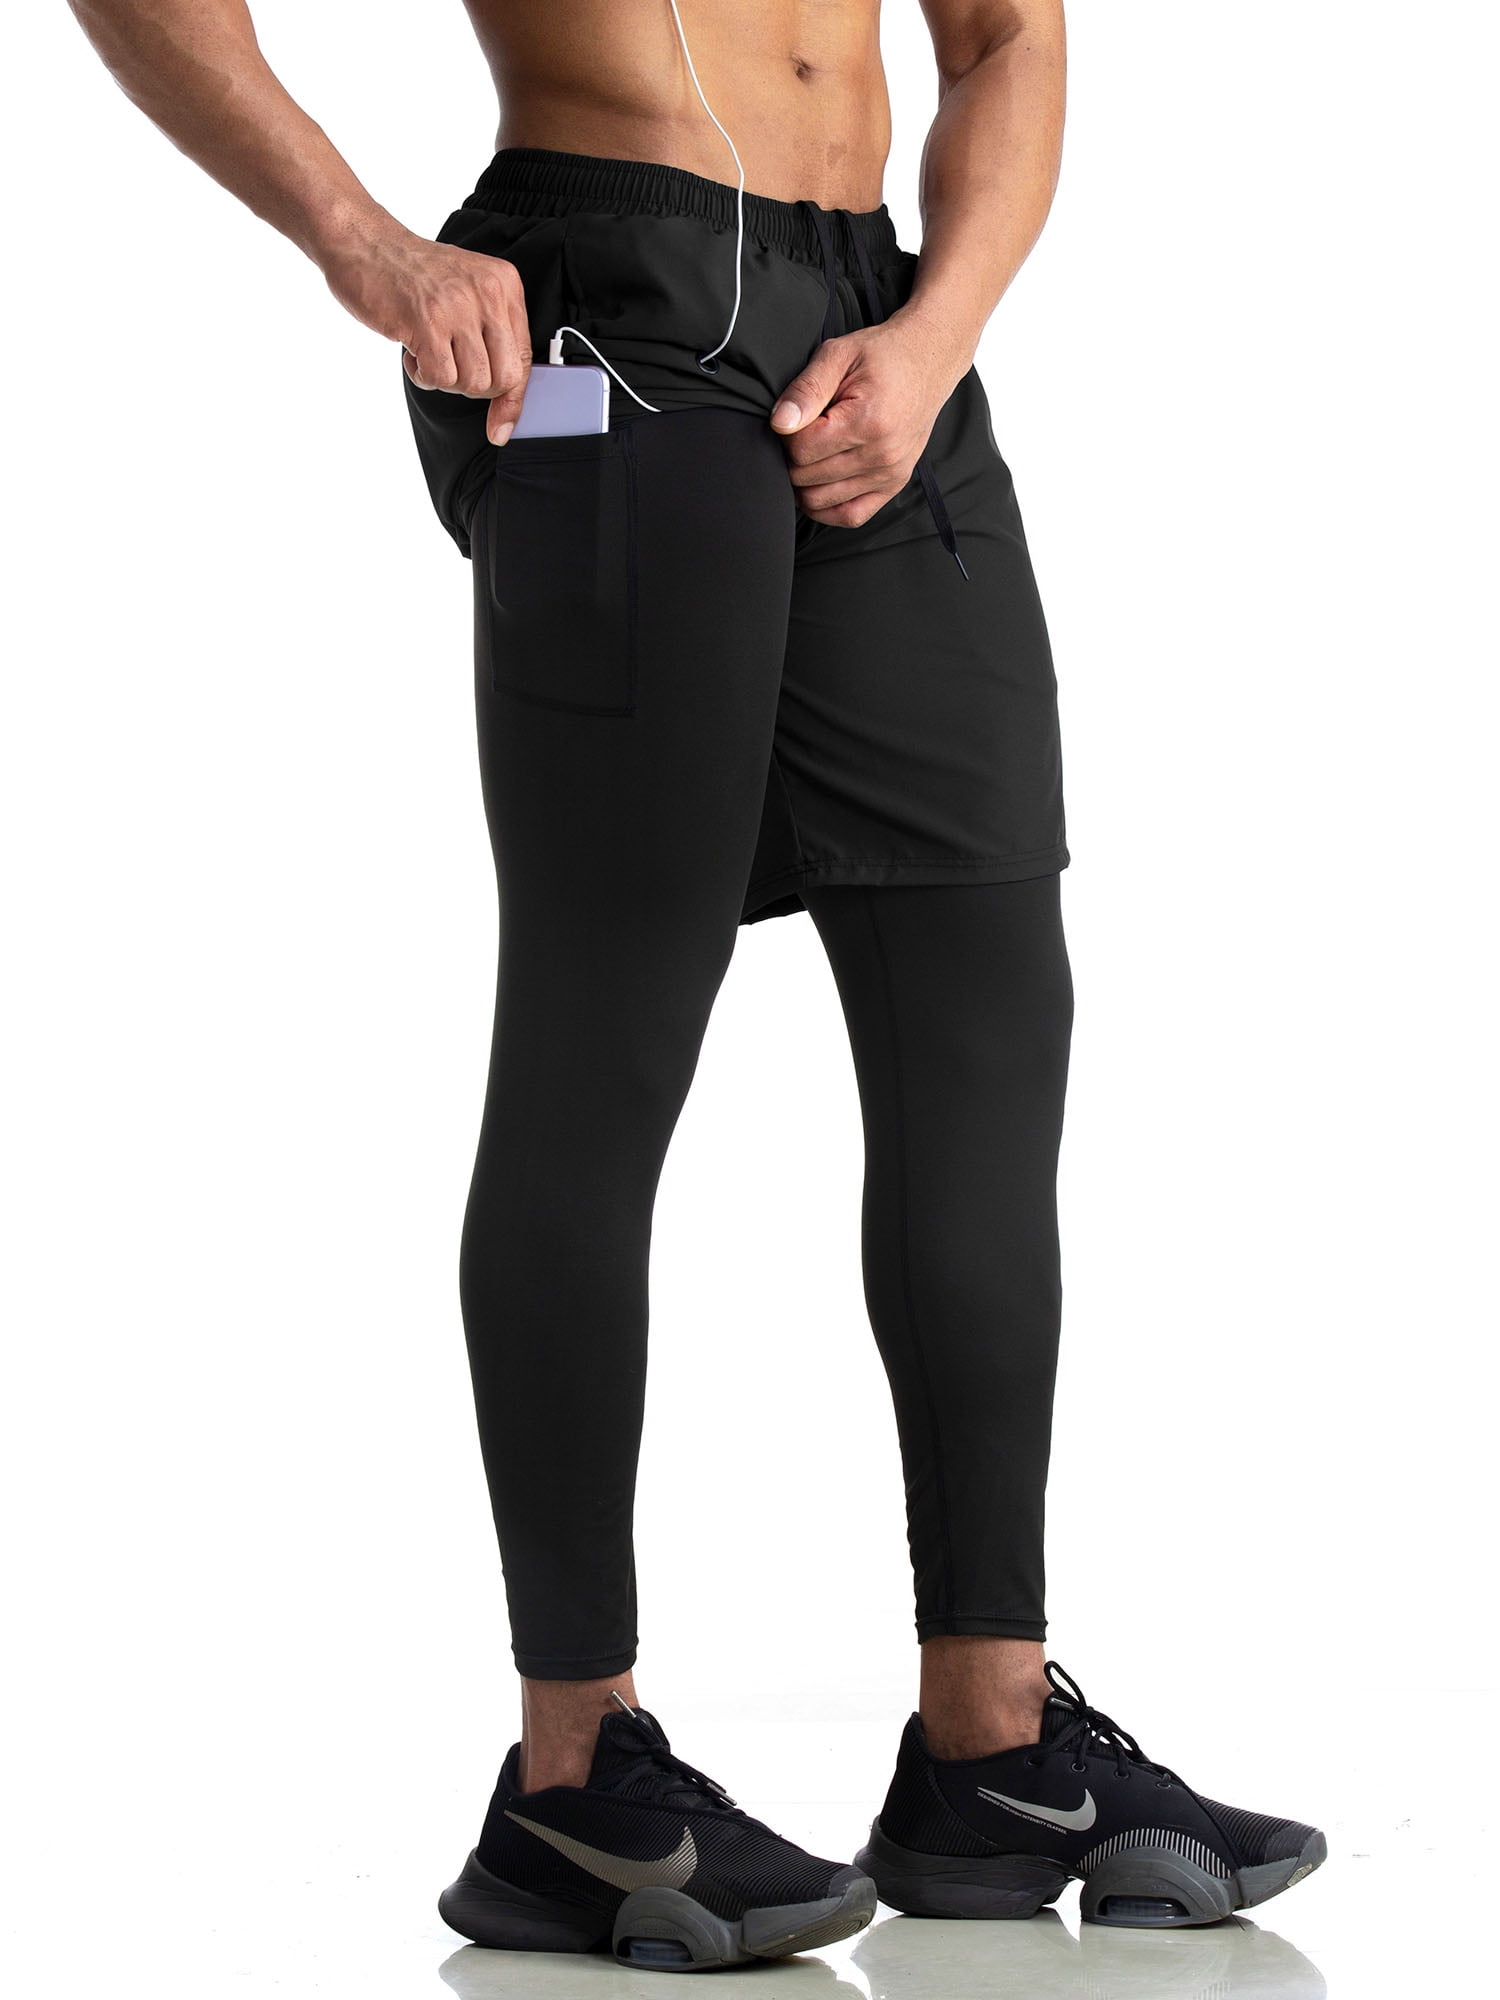 Spencer Men's 2 in 1 Running Pants Quick Dry Compression Tights Pants Gym  Athletic Workout Legging with Phone Pocket, Black 